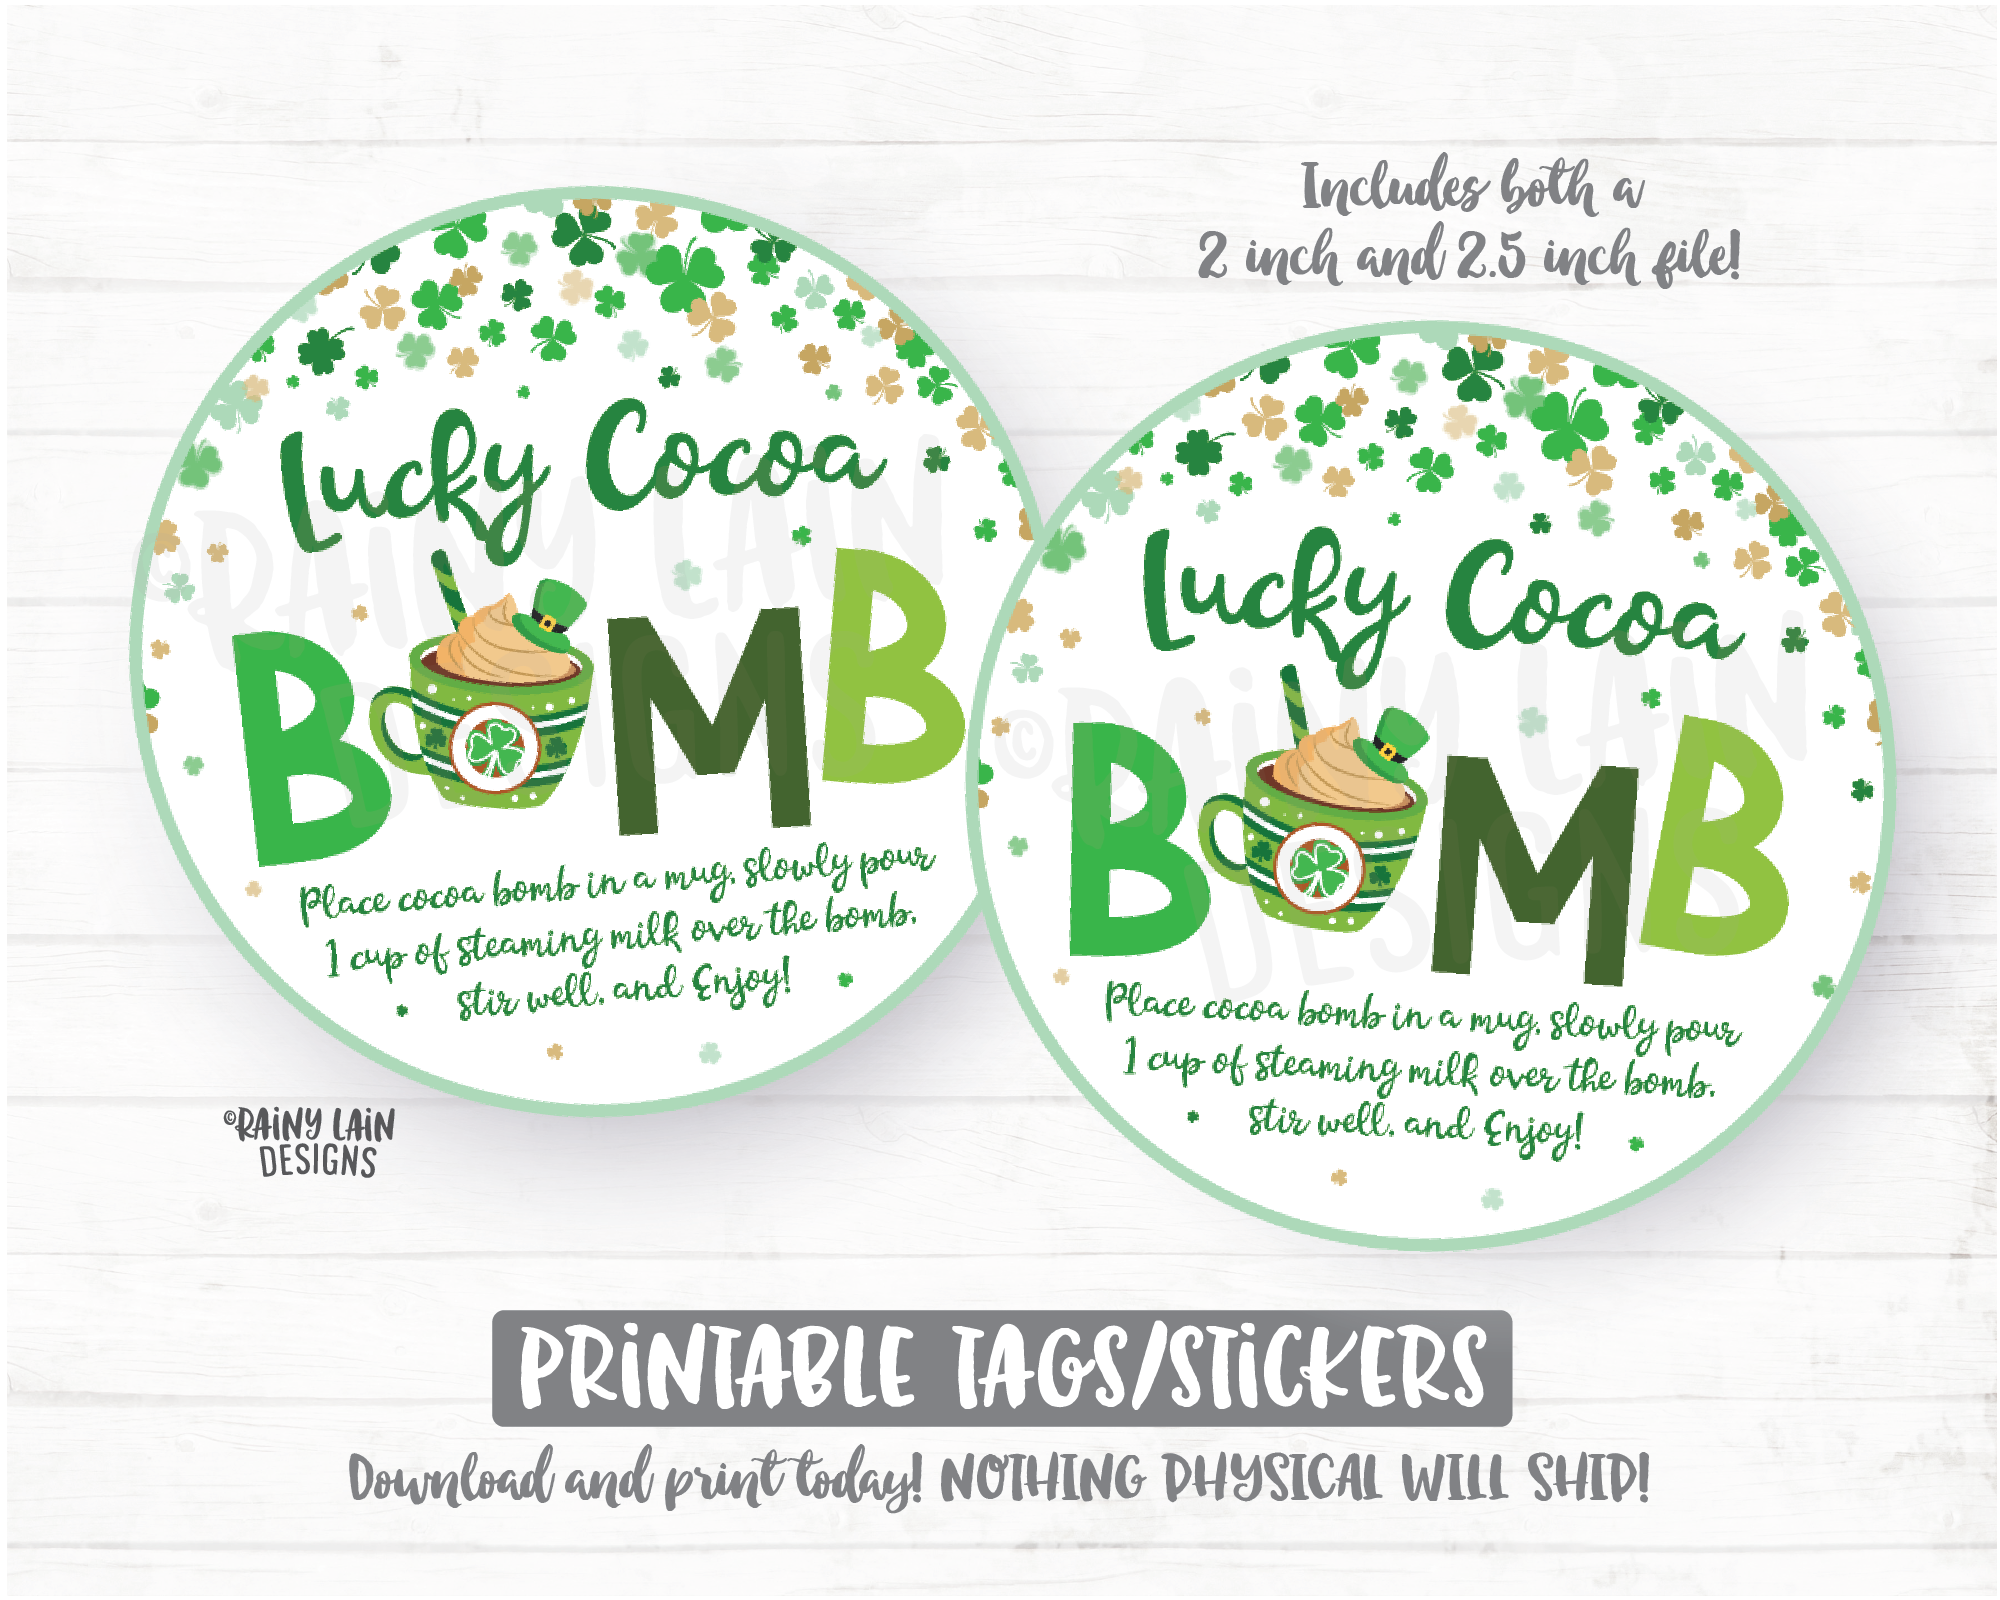 Copy of Happy St Patrick's Day Tag, Shamrocks Printable Cookie Tag, Round Tag, 2 inch circle tag, Cookie Card Lucky Charm Instant Download Bakery